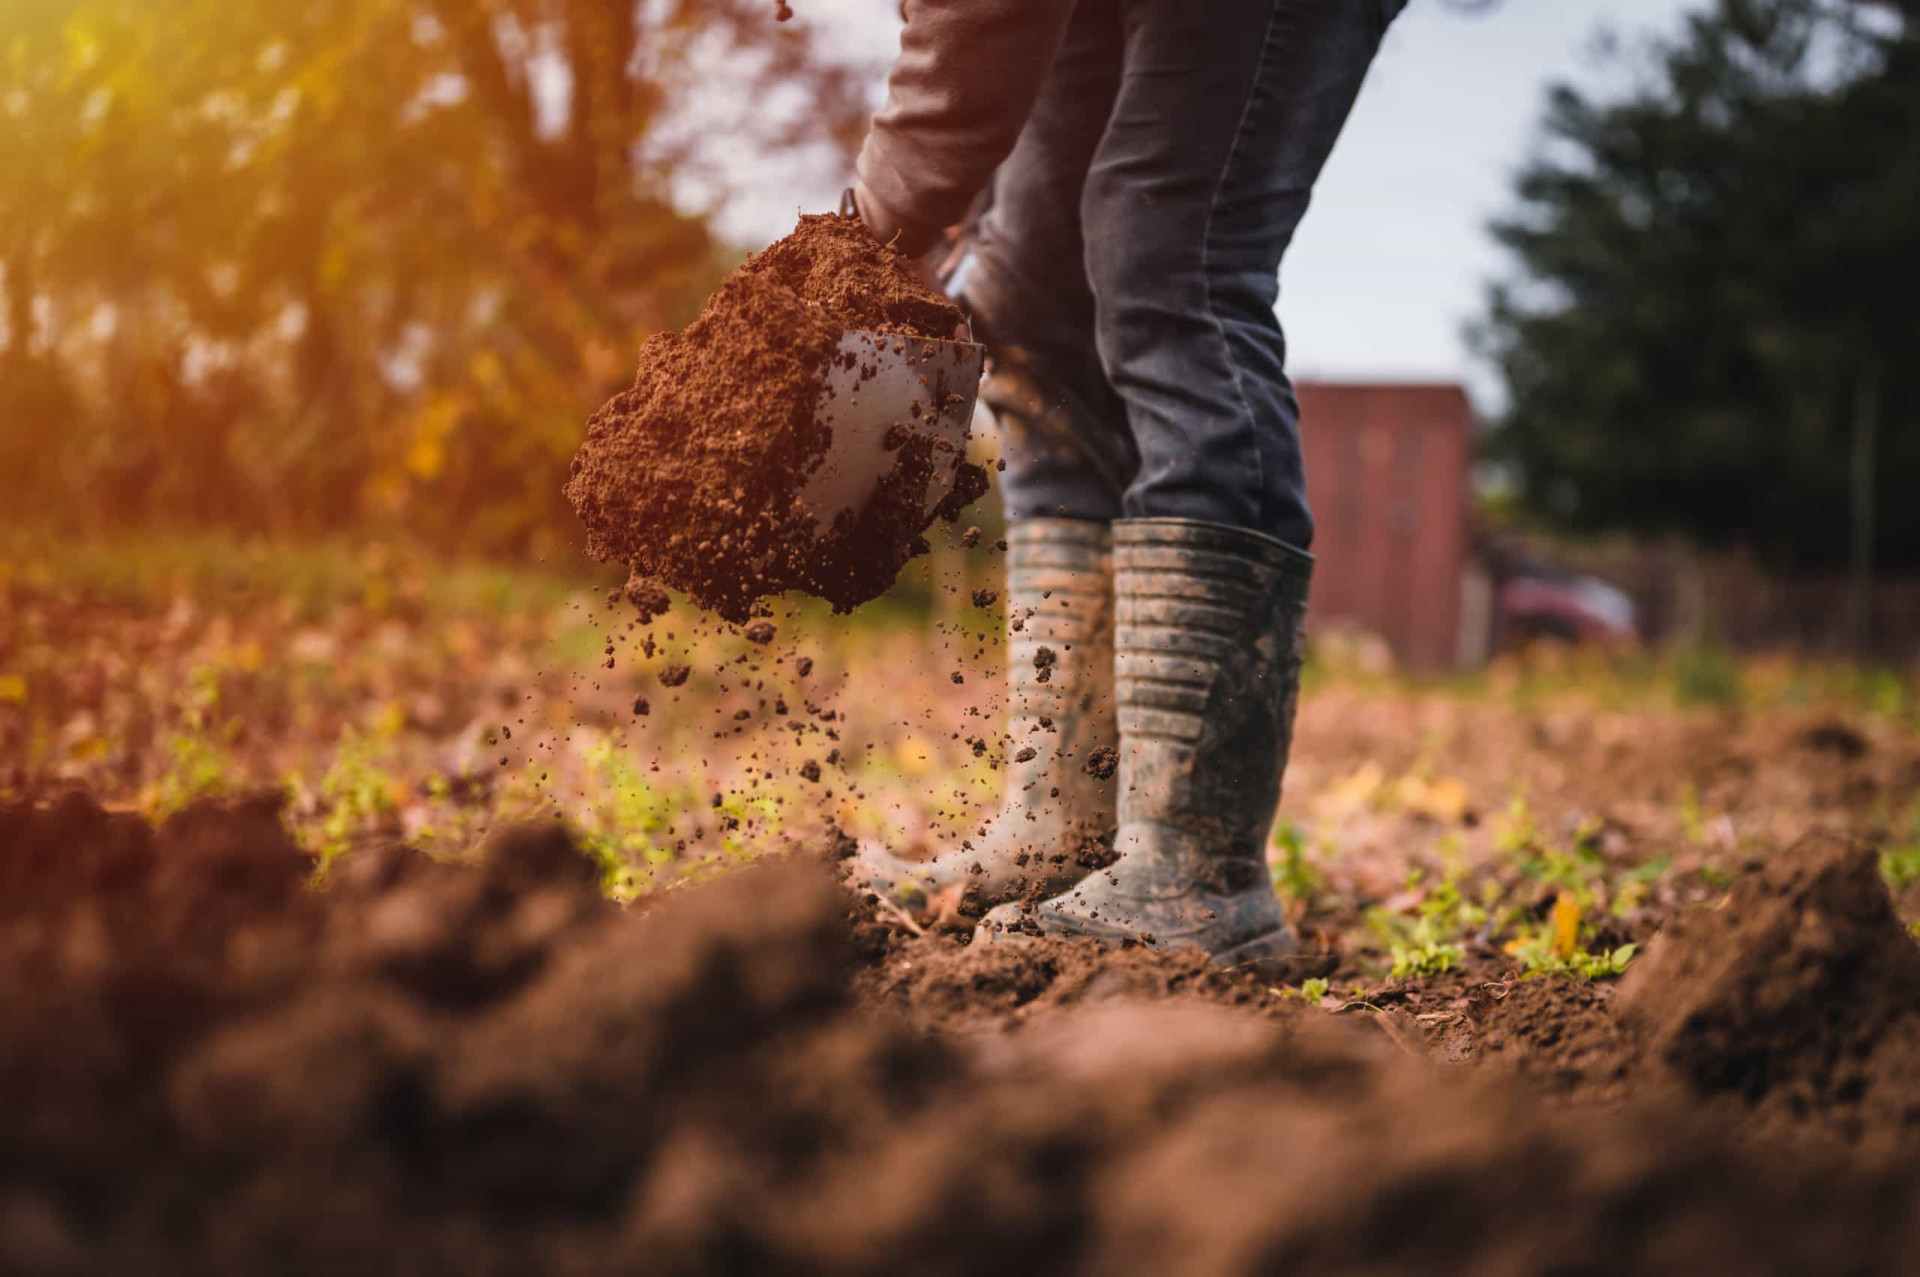 <p>When making a new vegetable garden, many people dig up a new patch in a lawn. But this is actually unnecessary. Instead, go for the ‘no dig gardening’ methodology that protects the soil and keeps it productive.</p><p>You may also like:<a href="https://www.starsinsider.com/n/410255?utm_source=msn.com&utm_medium=display&utm_campaign=referral_description&utm_content=491515en-us"> The best sad songs to cry to</a></p>